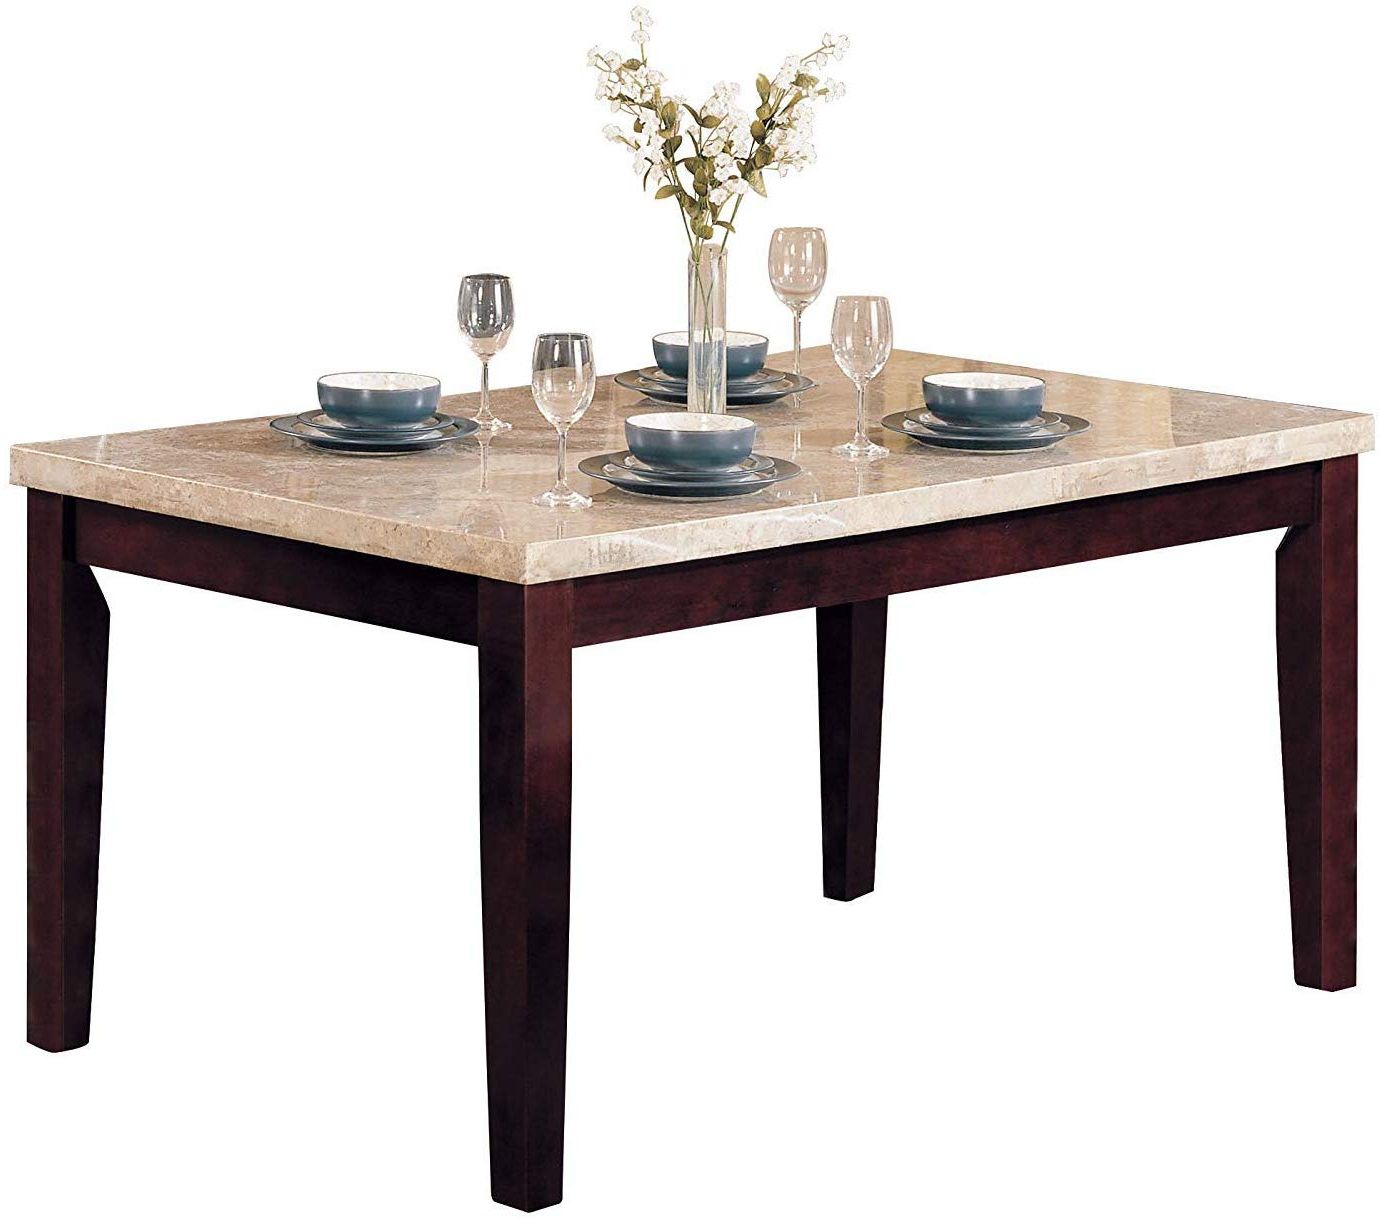 Fashionable Acme Britney Walnut Dining Table With White Marble Top With Walnut And Antique White Finish Contemporary Country Dining Tables (View 1 of 25)